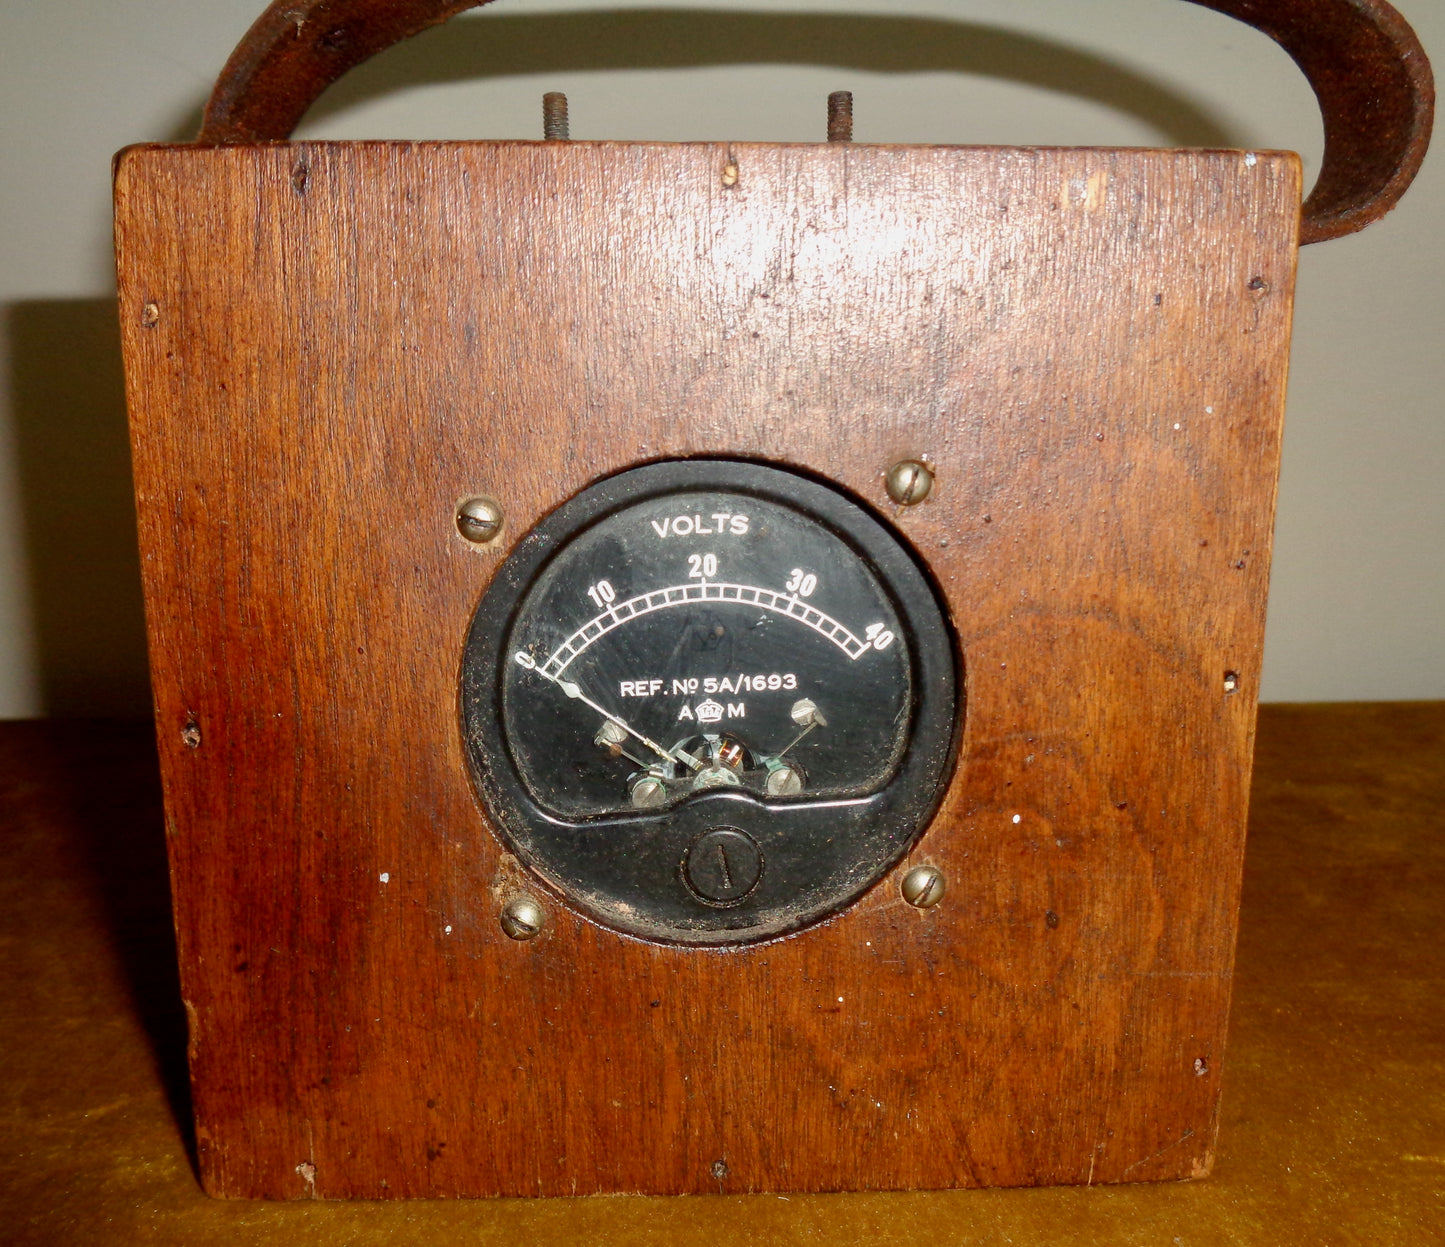 WW2 Air Ministry Voltmeter 5A/1693 In A Wooden Box 